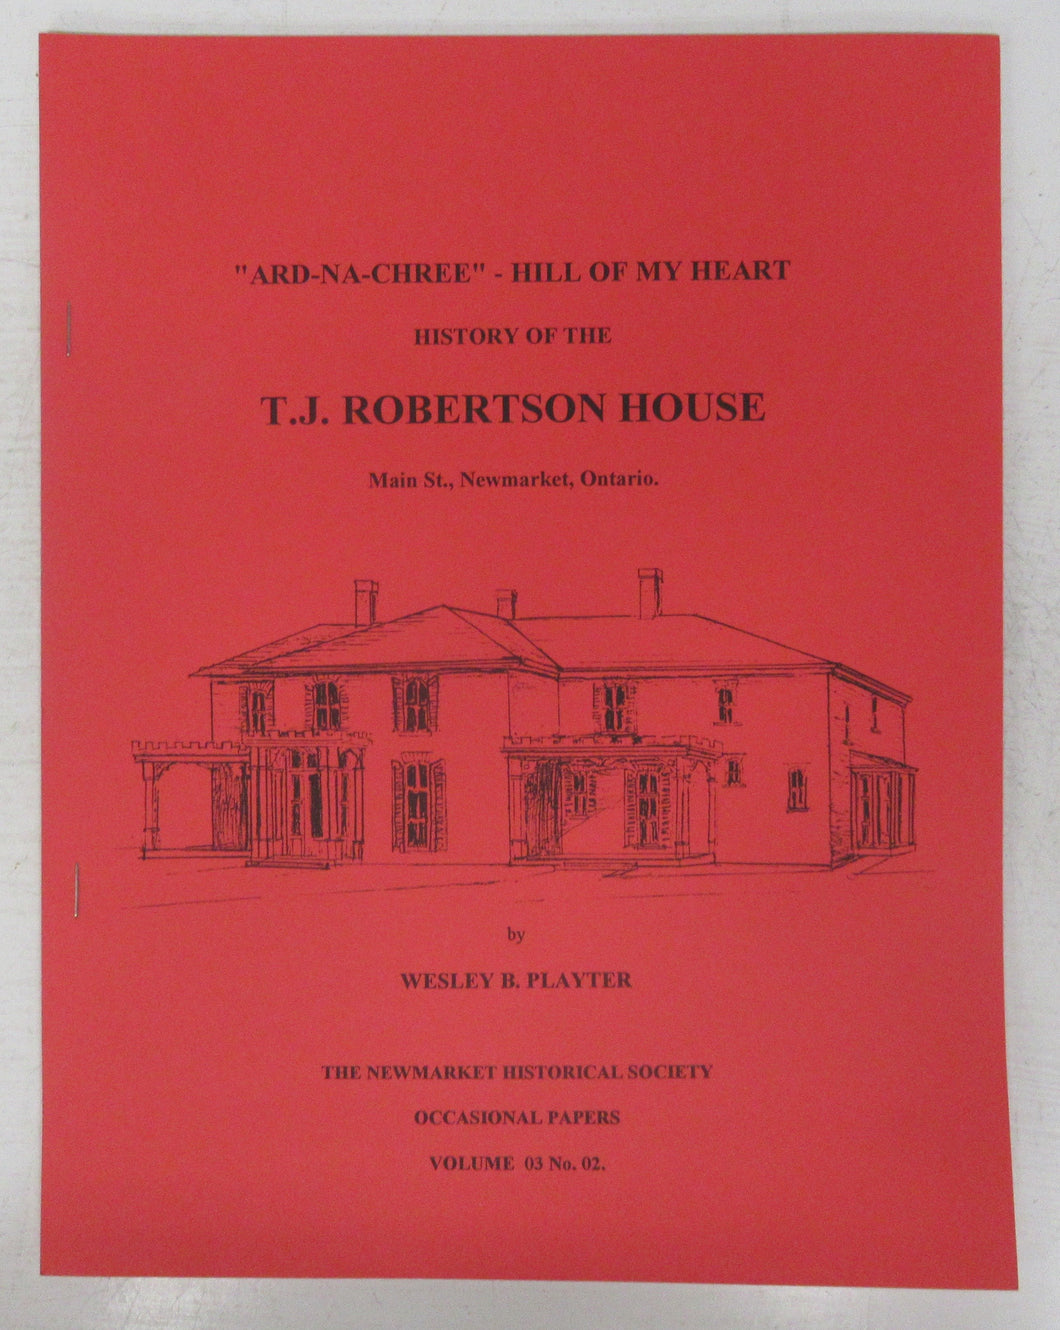 Ard-Na-Chree - Hill of My Heart. History of the T. J. Robertson House, Main St., Newmarket, Ontario